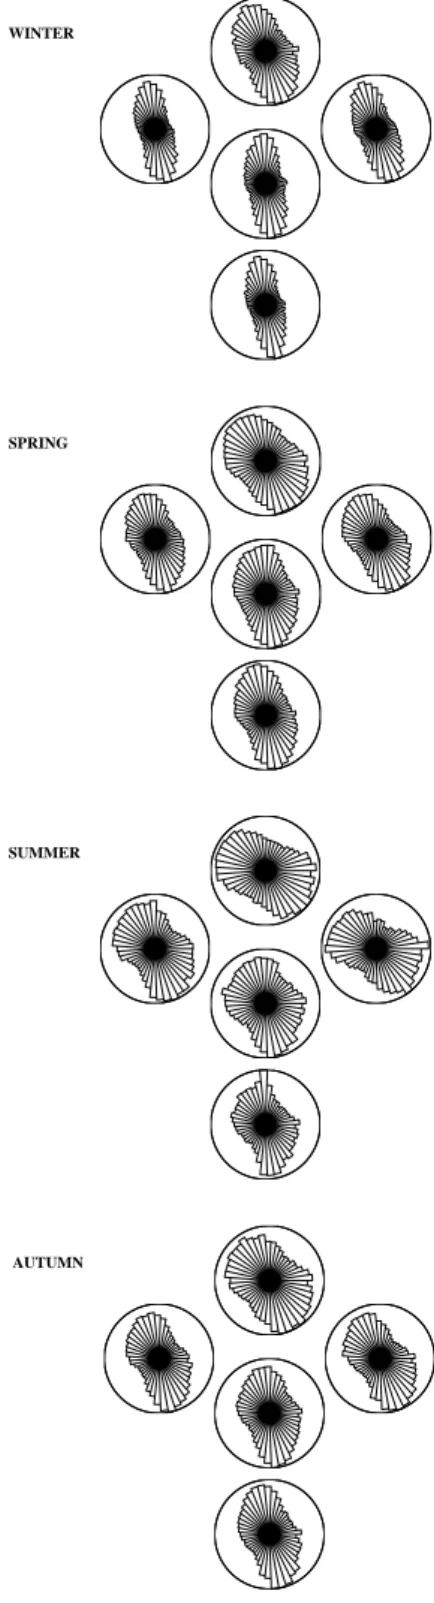 Fig. 10. Directional distributions of dH/dt during the four seasons from 1986 to 1996 at PEL, MUO, KIL, KEV, SOR